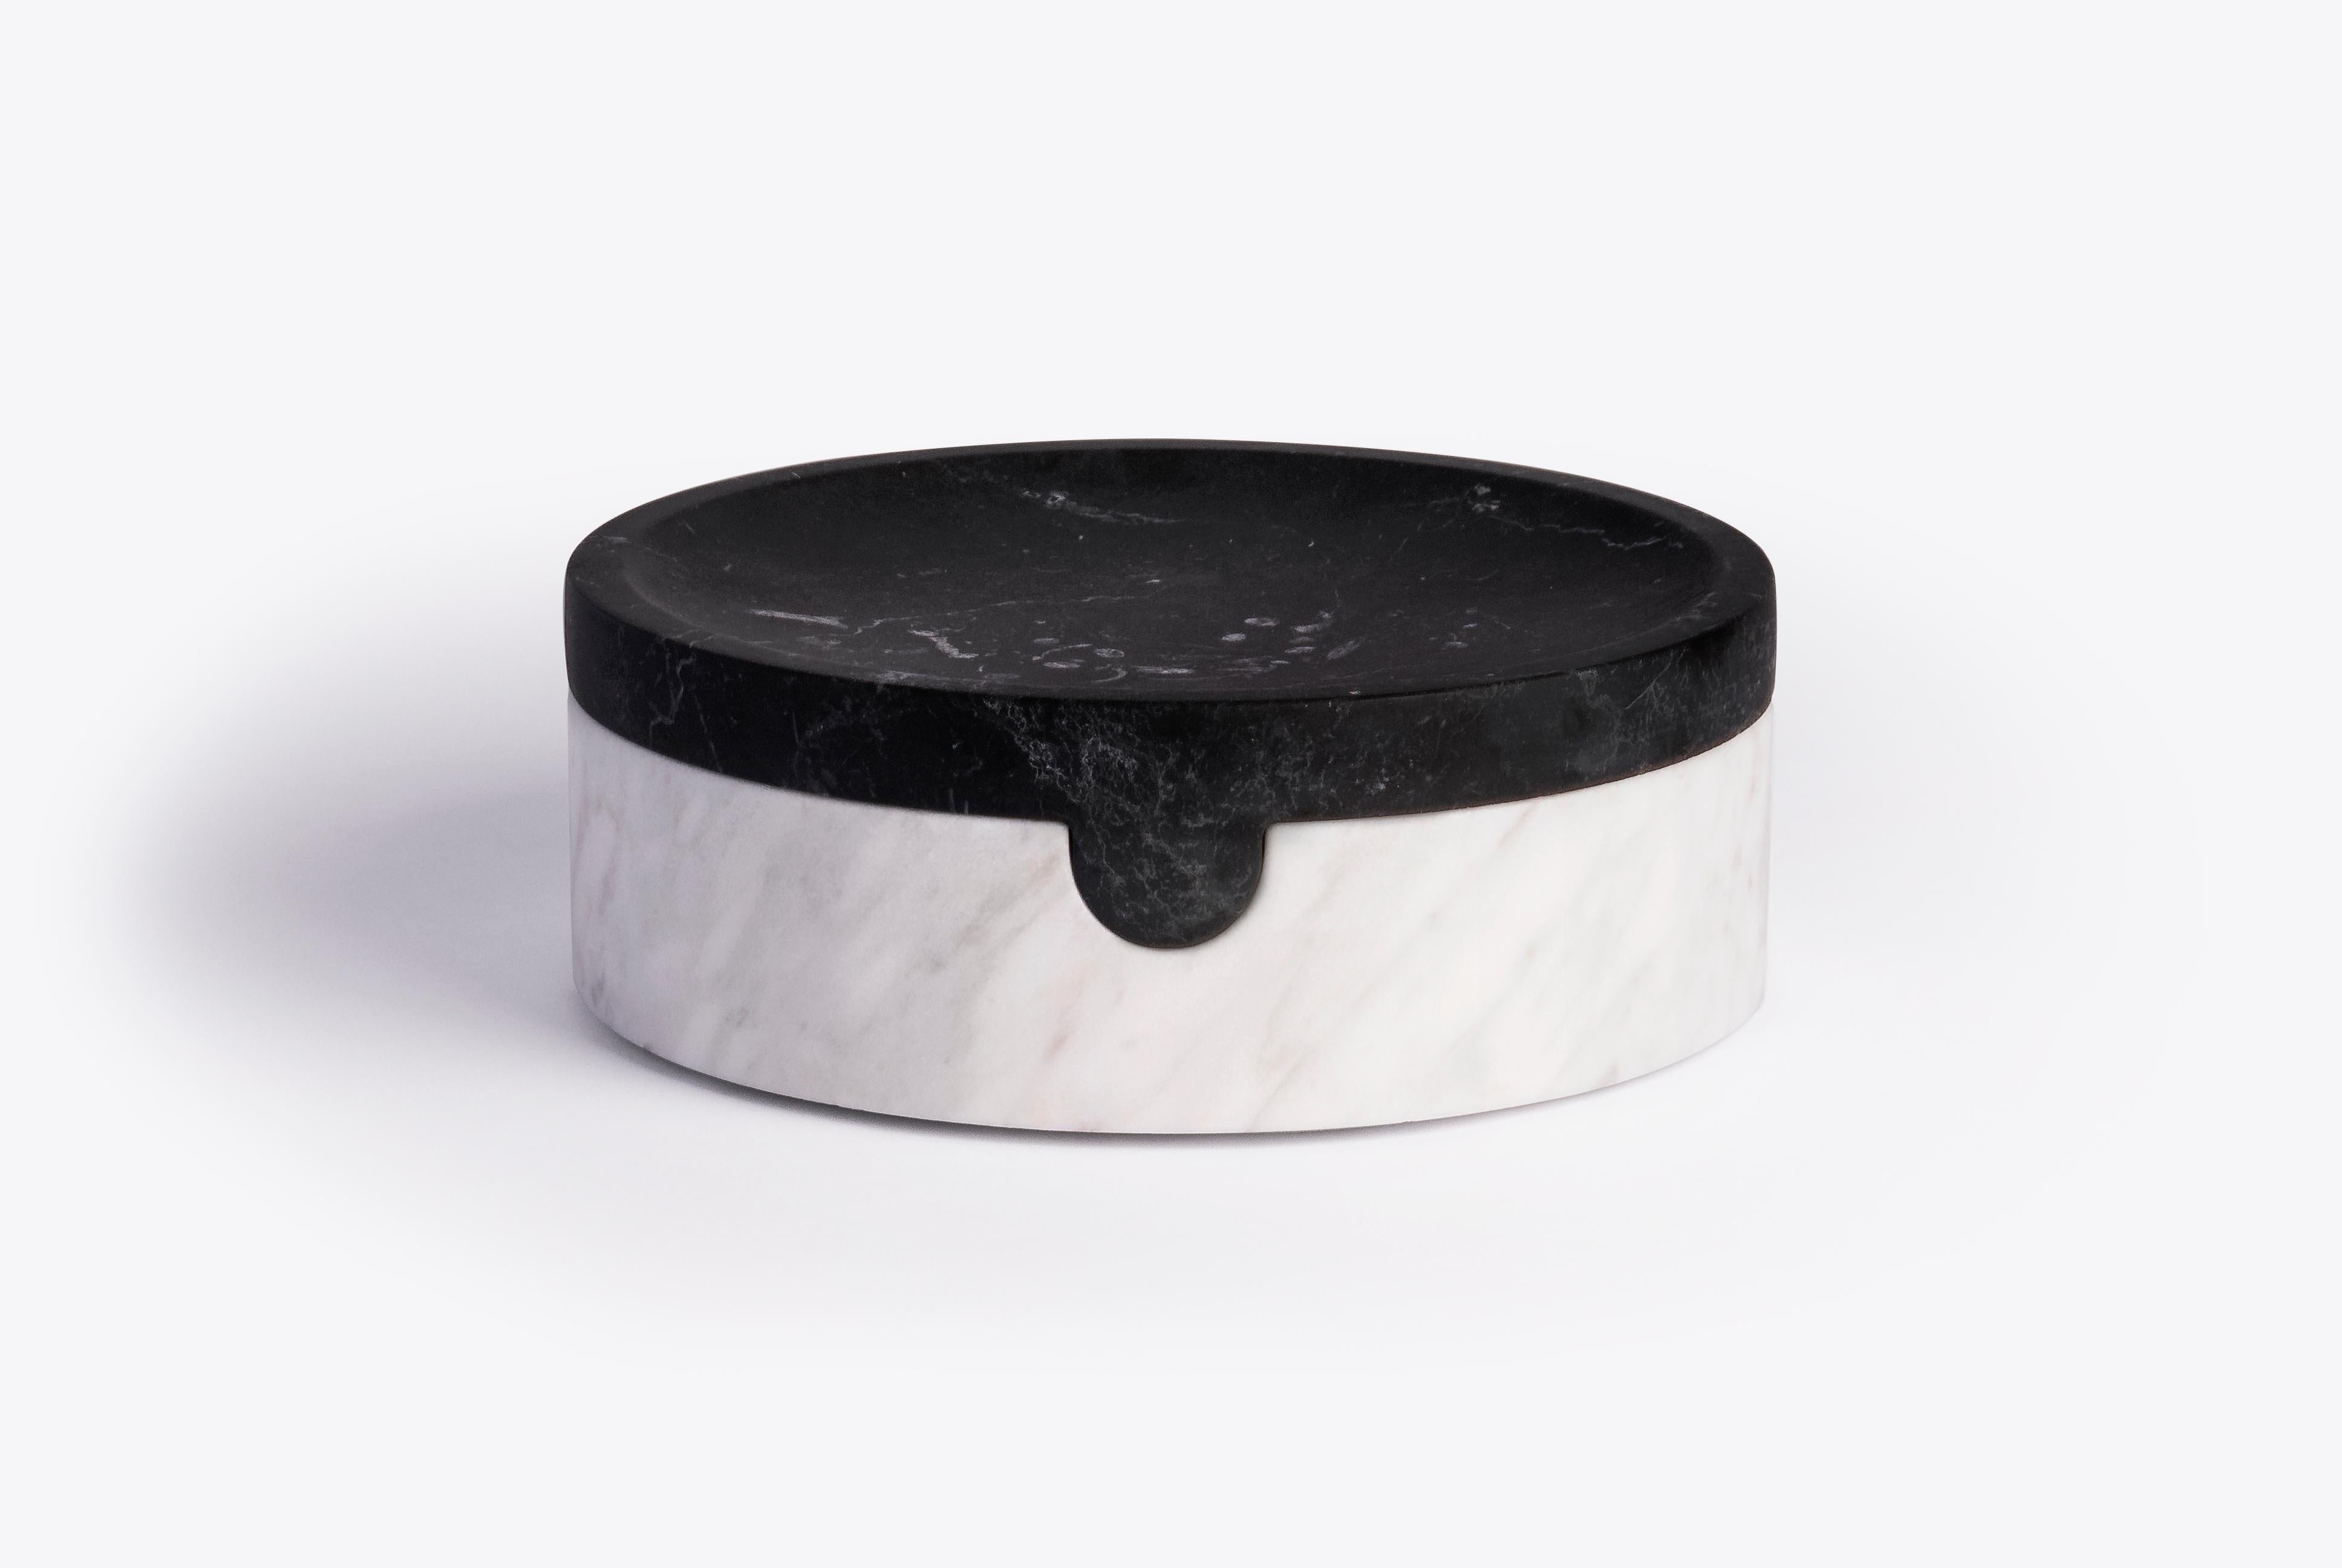 Ashes box with cover by Studio Lievito
Dimensions: D20 x W20 X H7 cm
Materials: Bianco carrara marble, nero marquina marble.
Weight: 3 kg.

An oppositions where the humility of the ashes gives way to the preciousness of the objects to enclose. A box